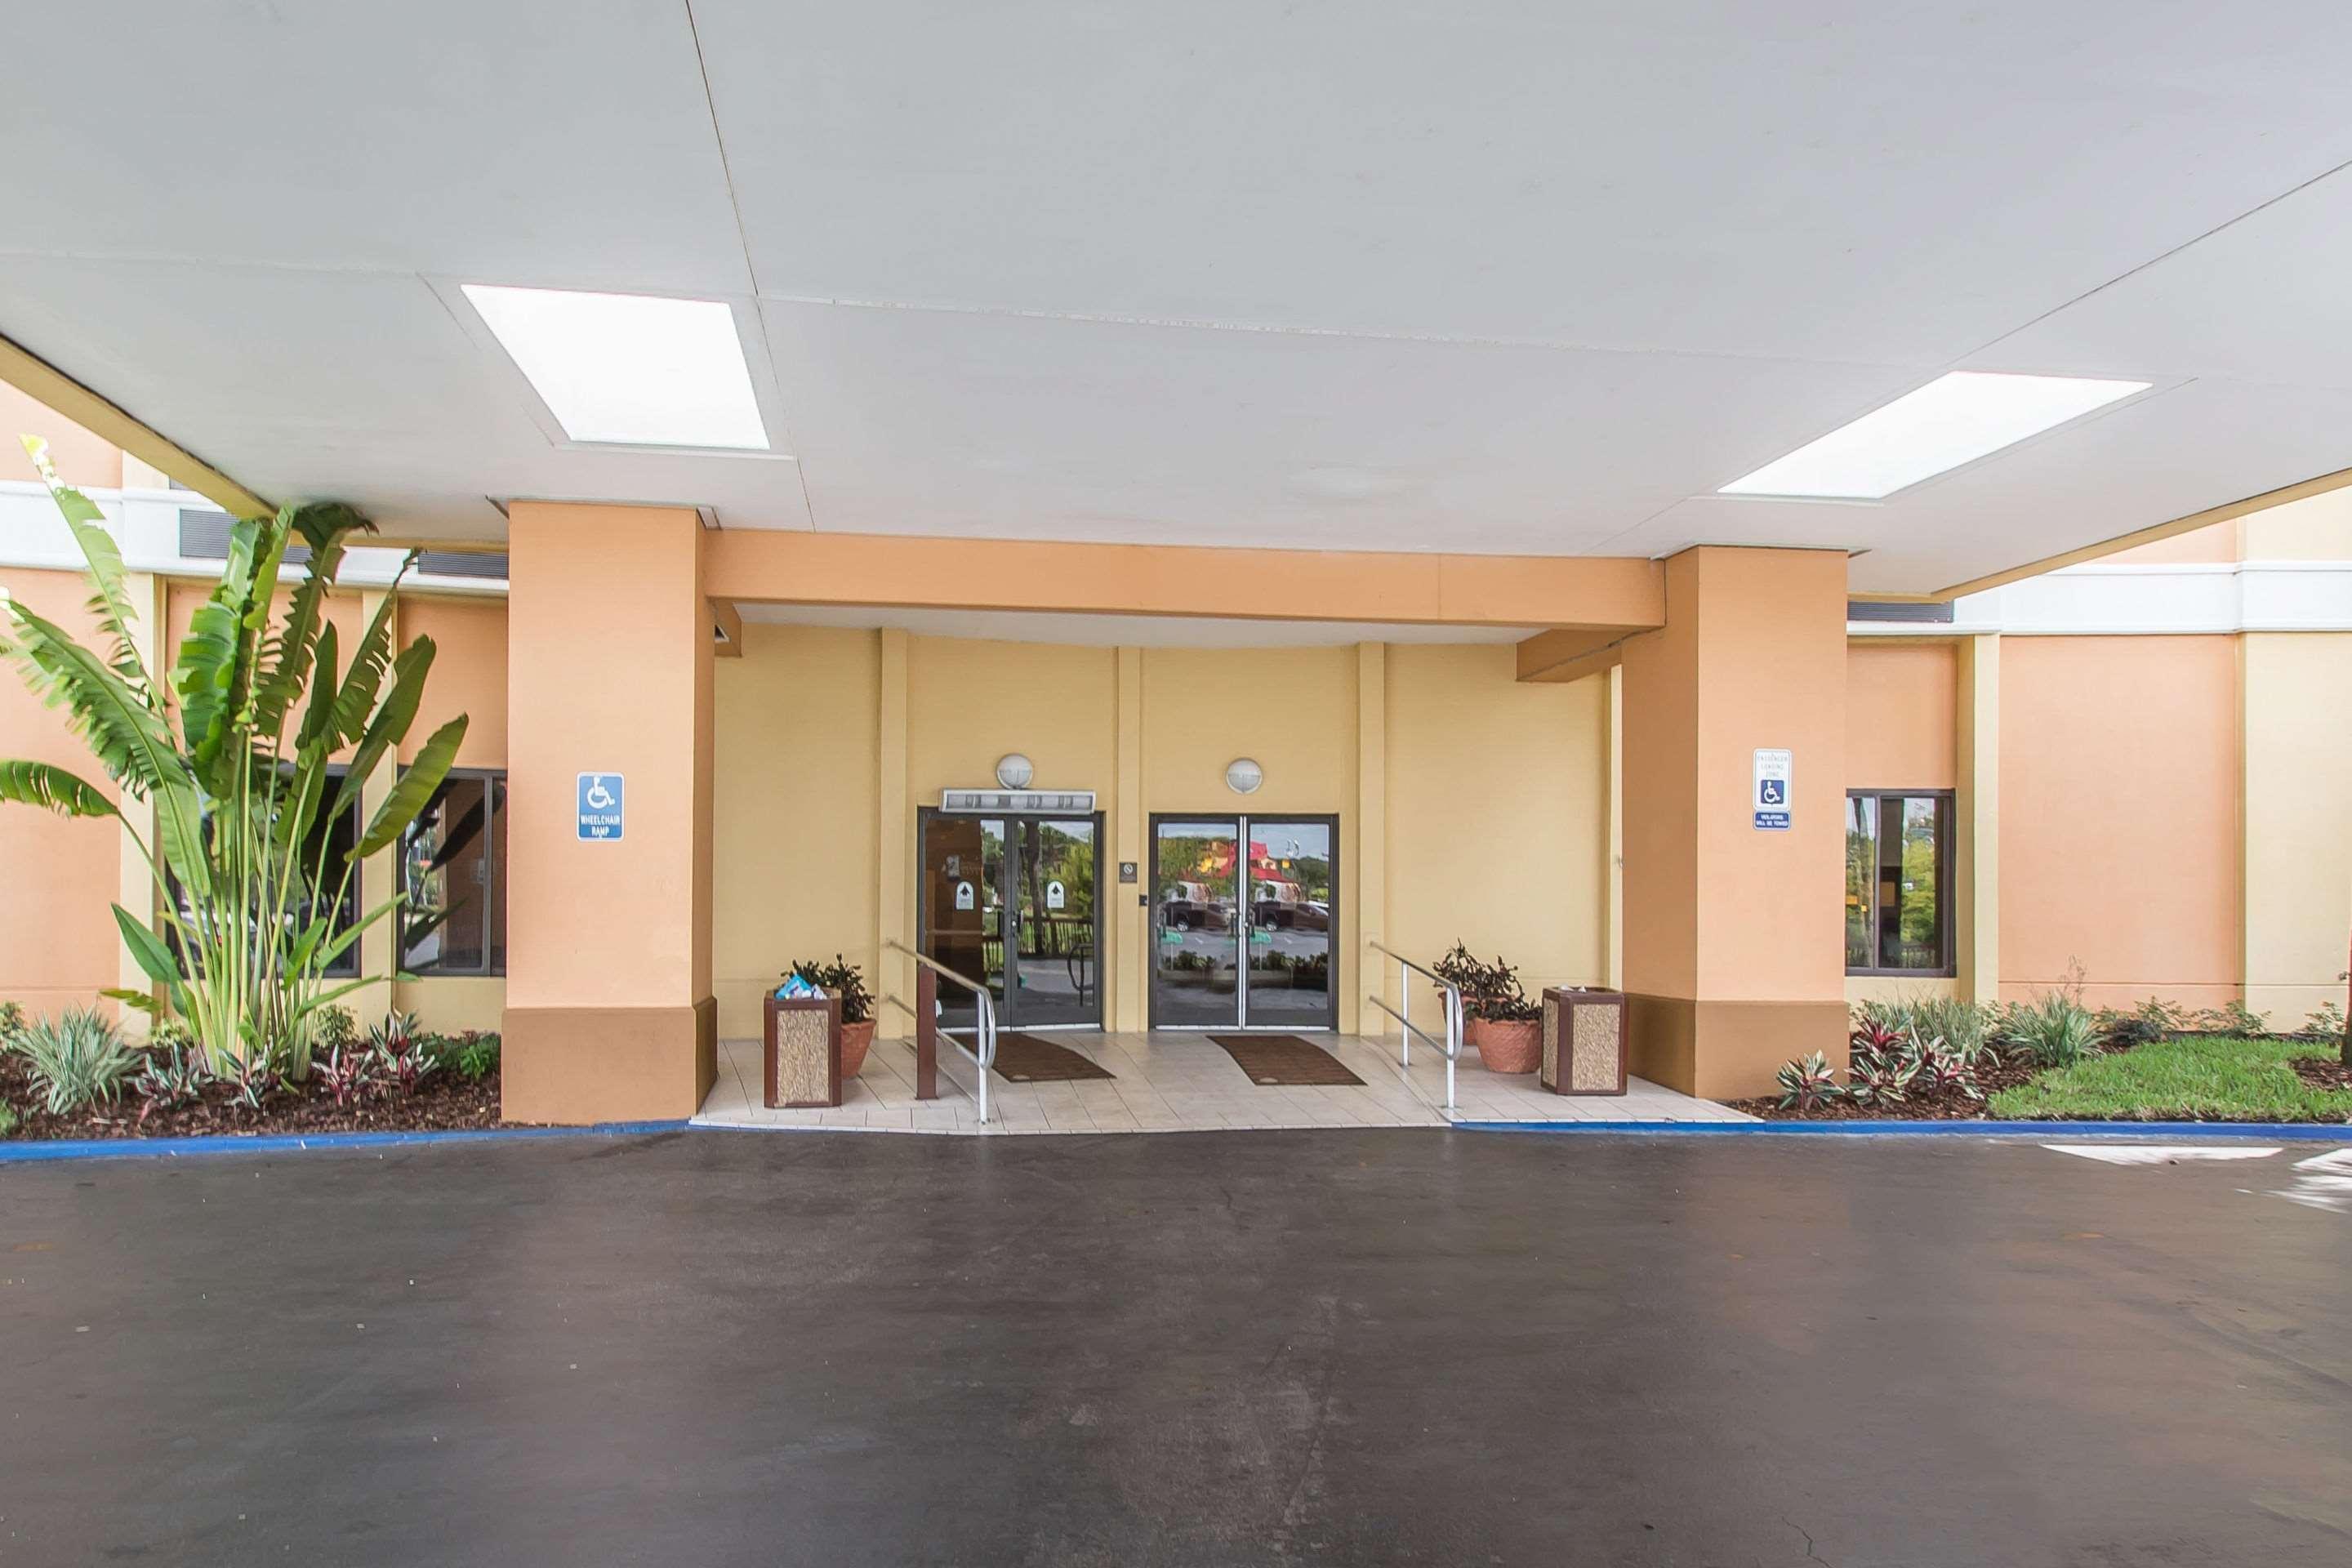 Comfort Inn & Suites Kissimmee By The Parks Orlando Exterior photo